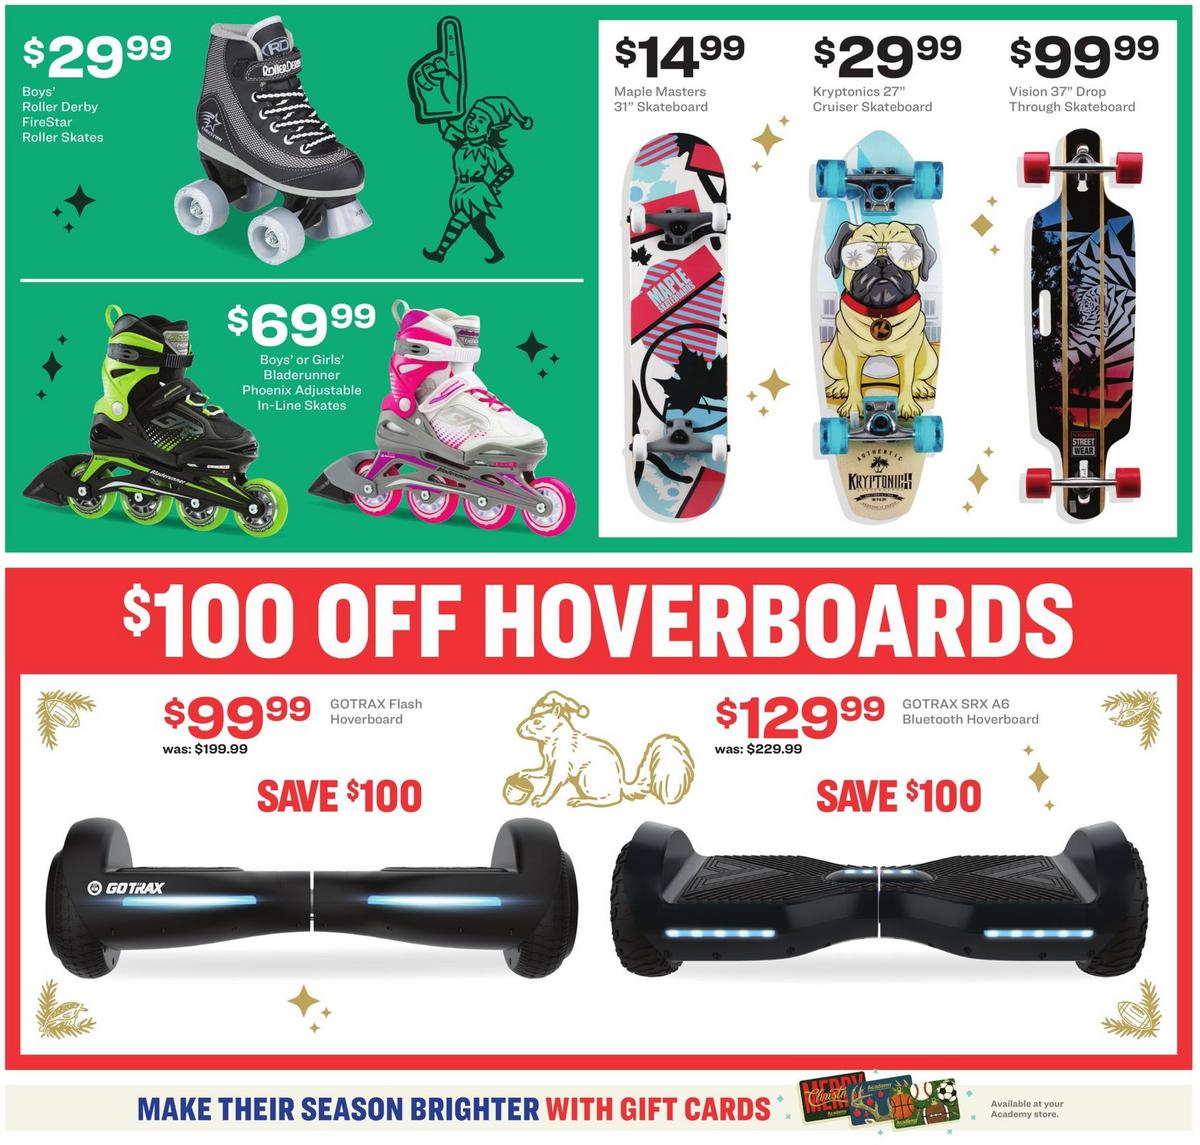 Academy Sports + Outdoors Christmas Hot Deals Ad Weekly Ad from December 14